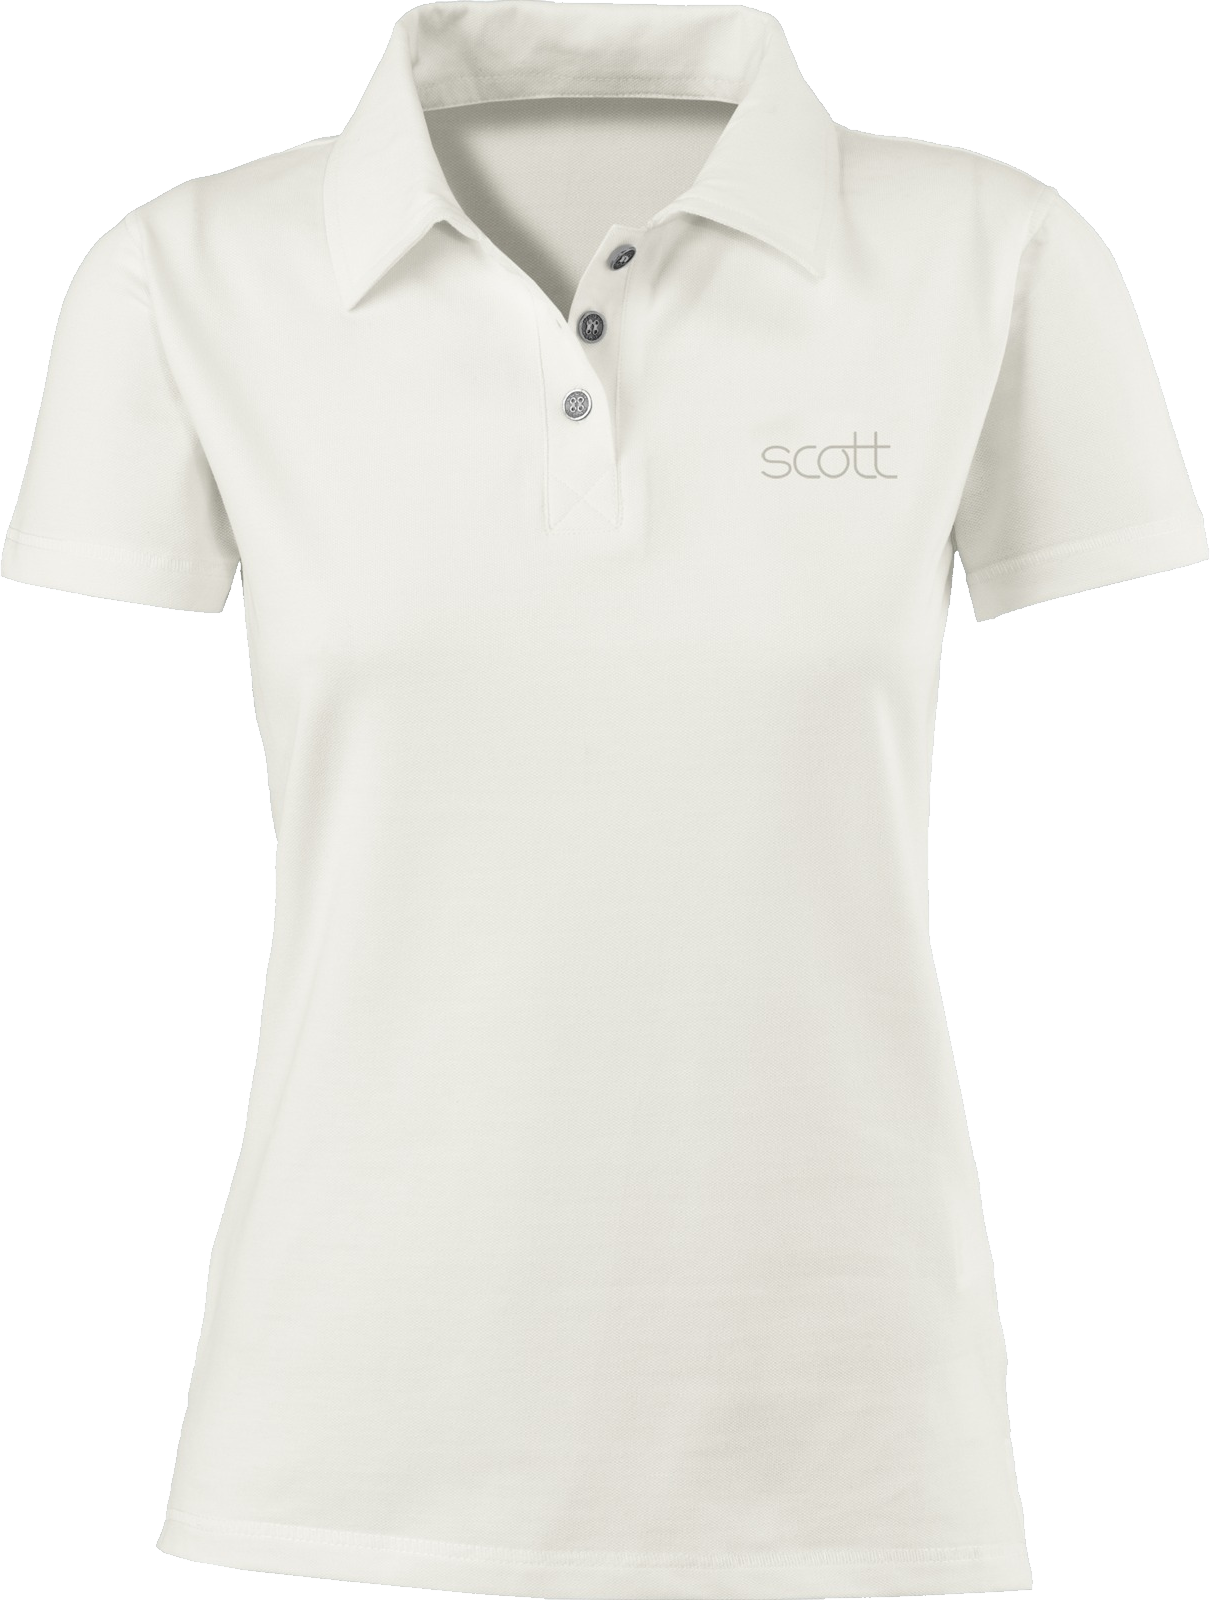 Shirt clipart polo. White png image purepng